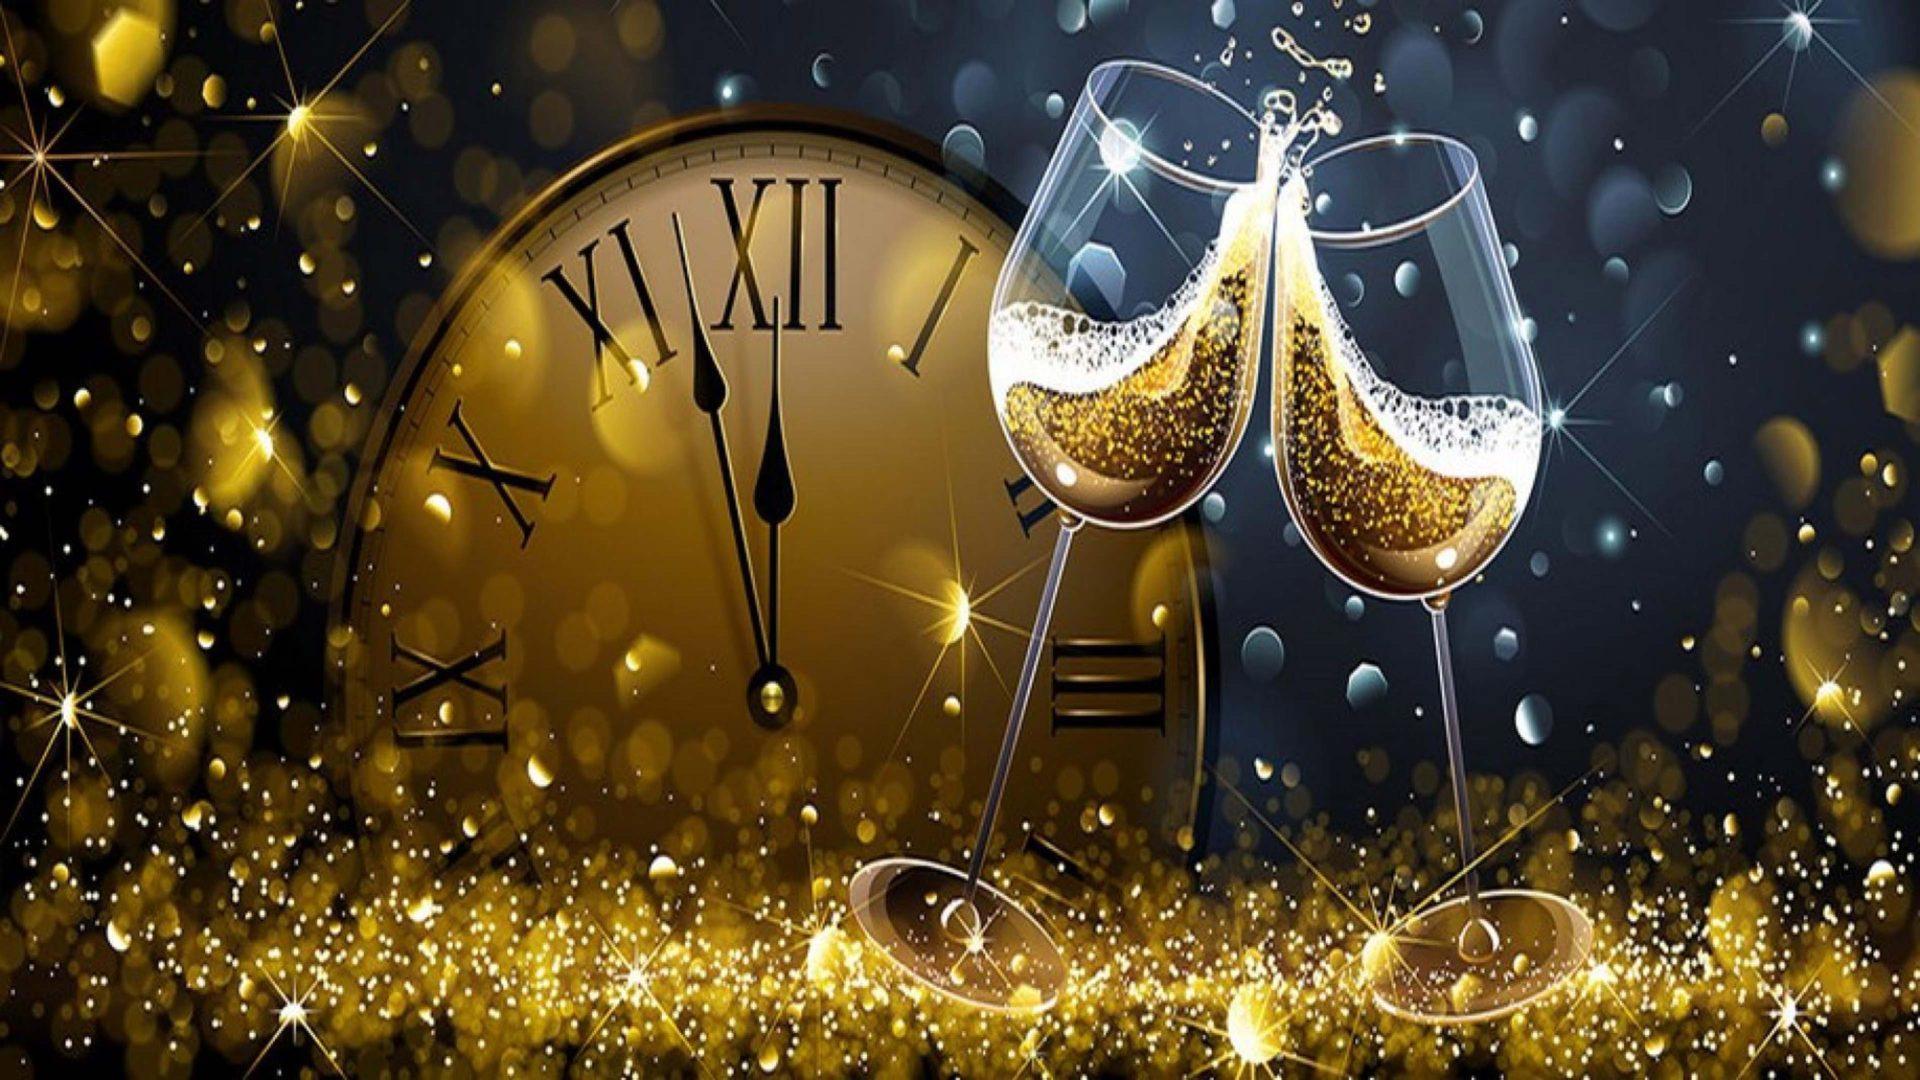 1920x1080 December 31 Happy New Year 2021 New Year's Party Greeting Card